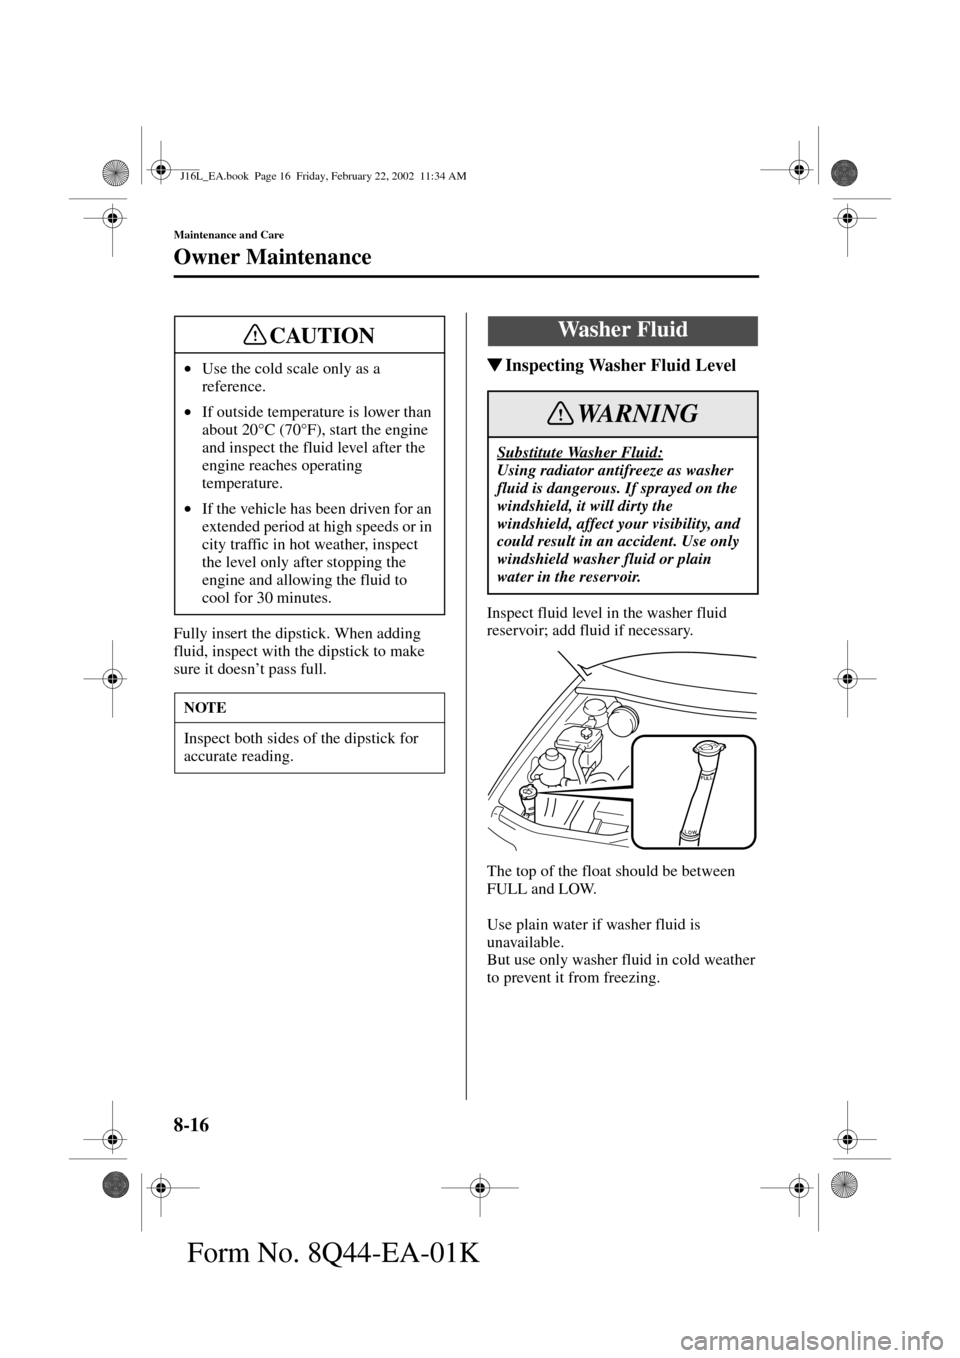 MAZDA MODEL MPV 2002  Owners Manual (in English) 8-16
Maintenance and Care
Owner Maintenance
Form No. 8Q44-EA-01K
Fully insert the dipstick. When adding 
fluid, inspect with the dipstick to make 
sure it doesn’t pass full.
Inspecting Washer Fluid